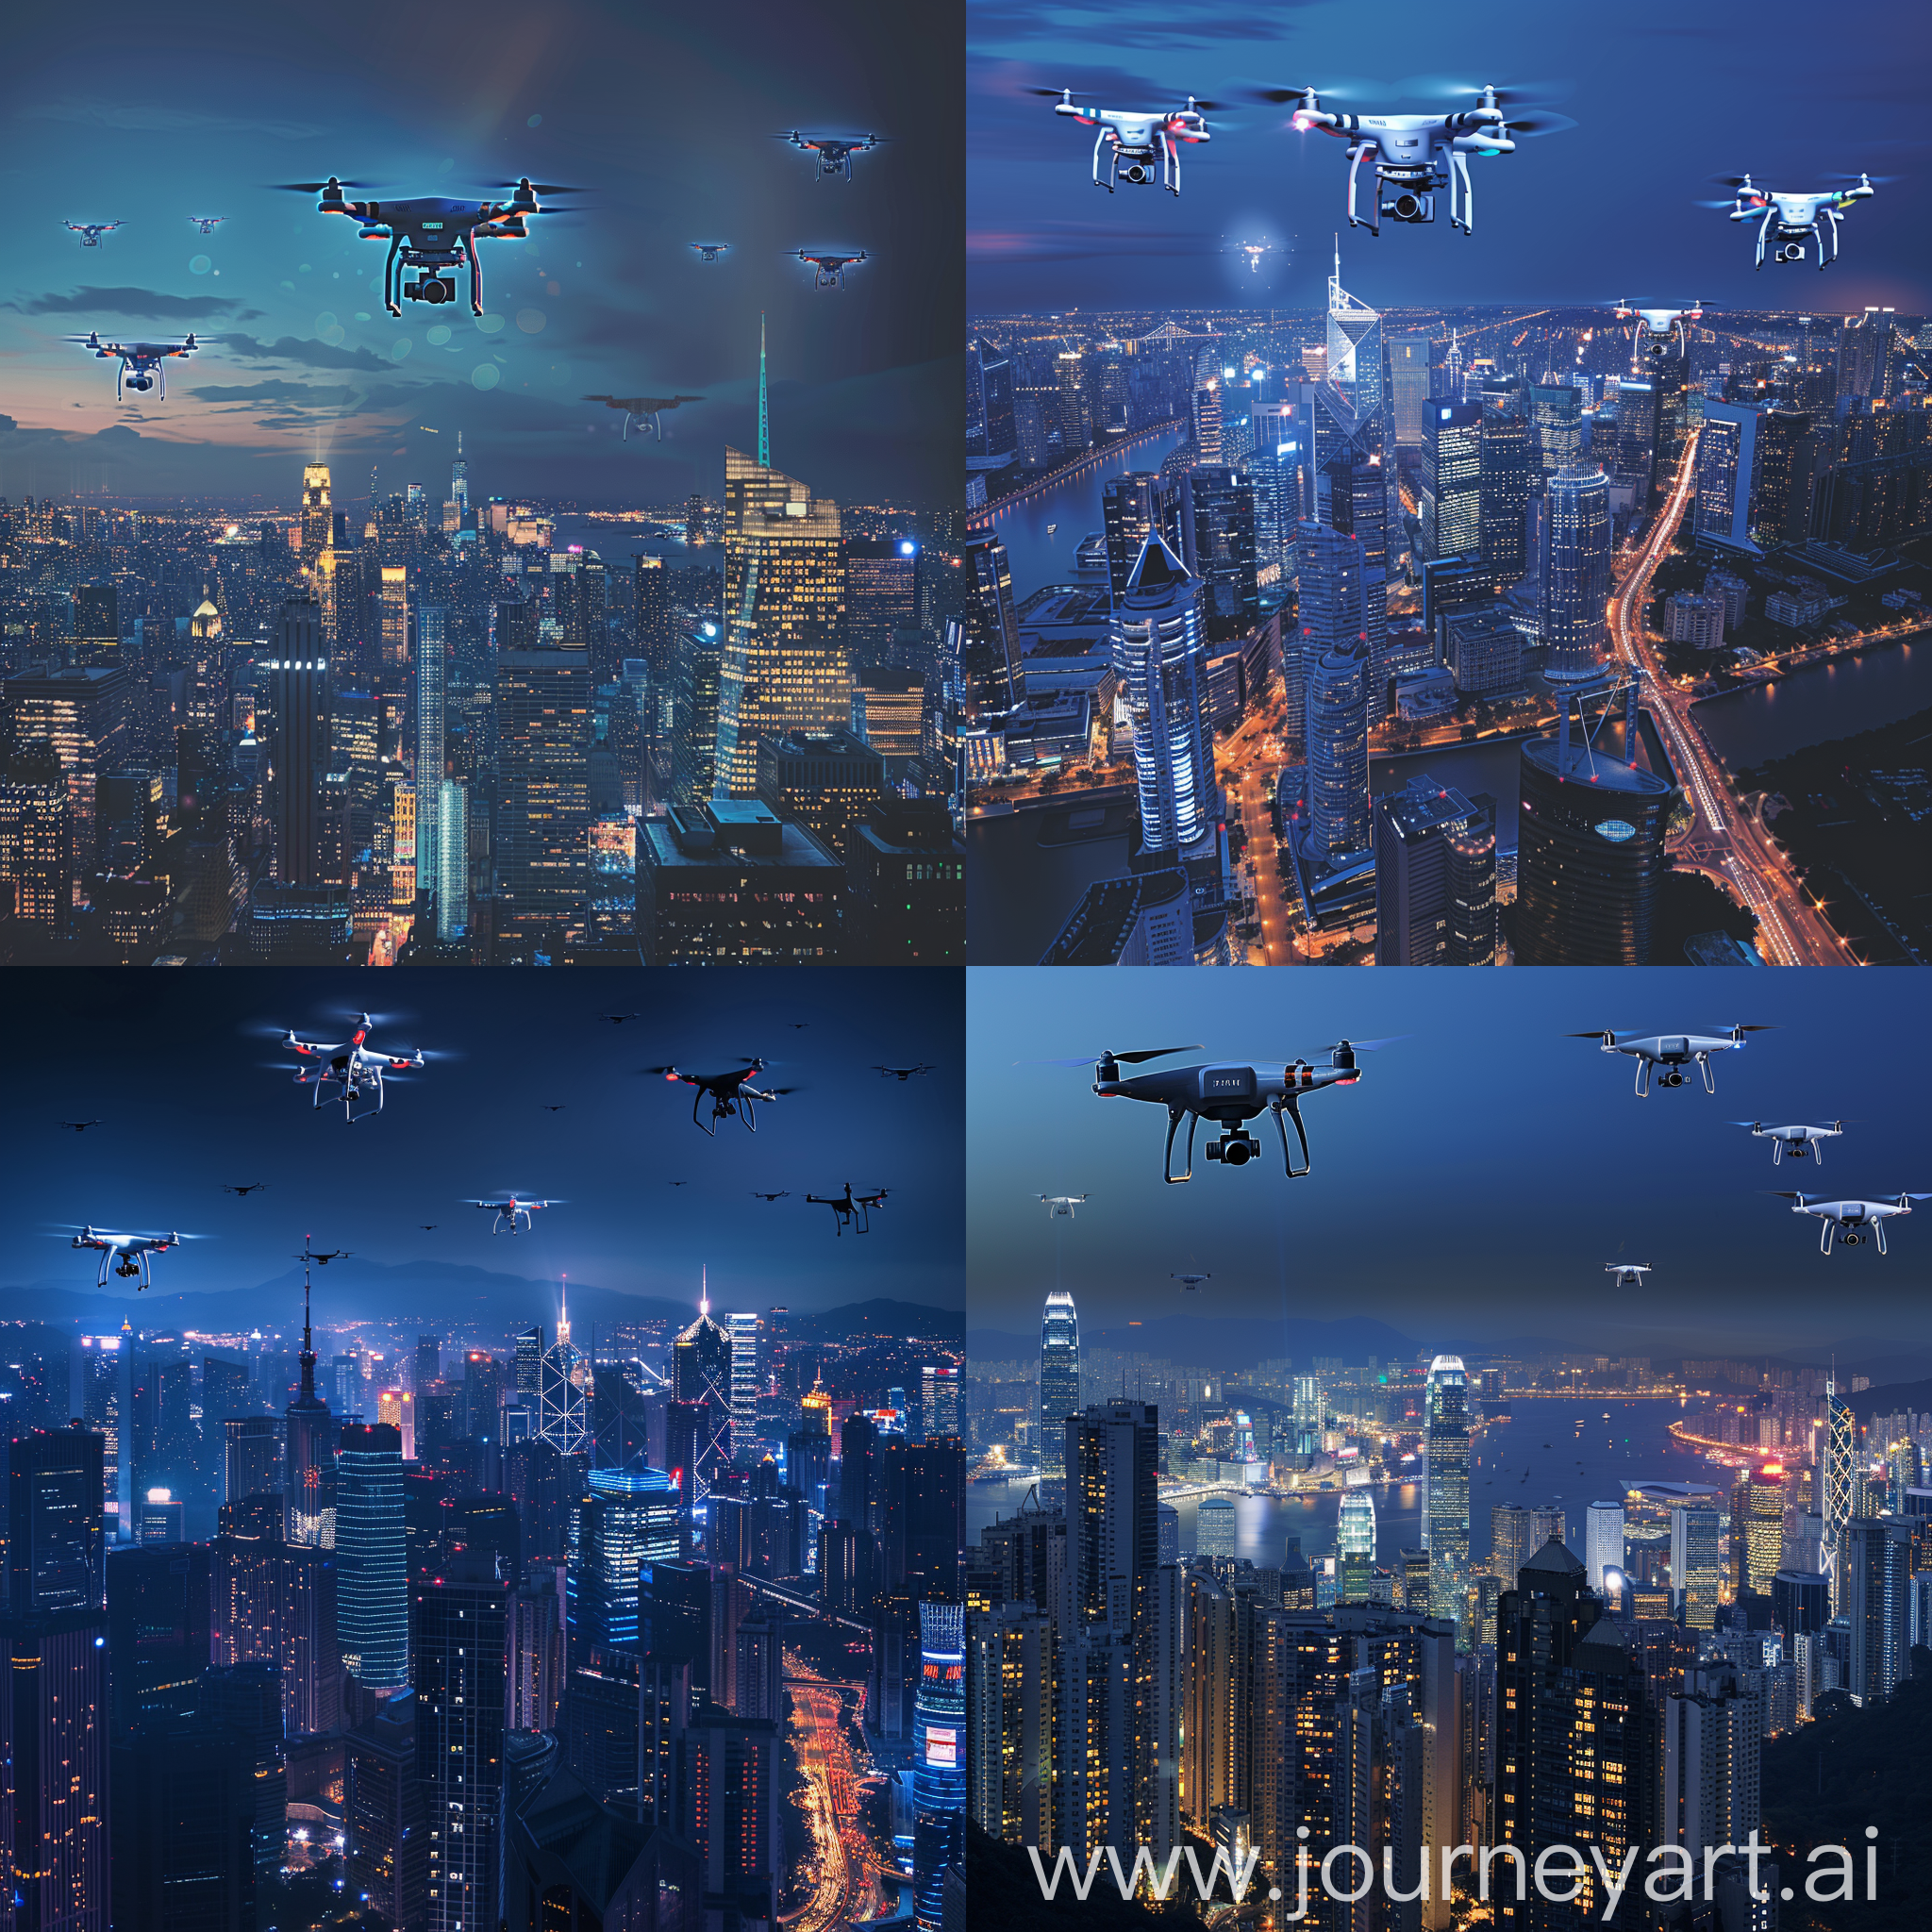 a realistic city skyline at night with drones flying, capturing a bustling, modern atmosphere